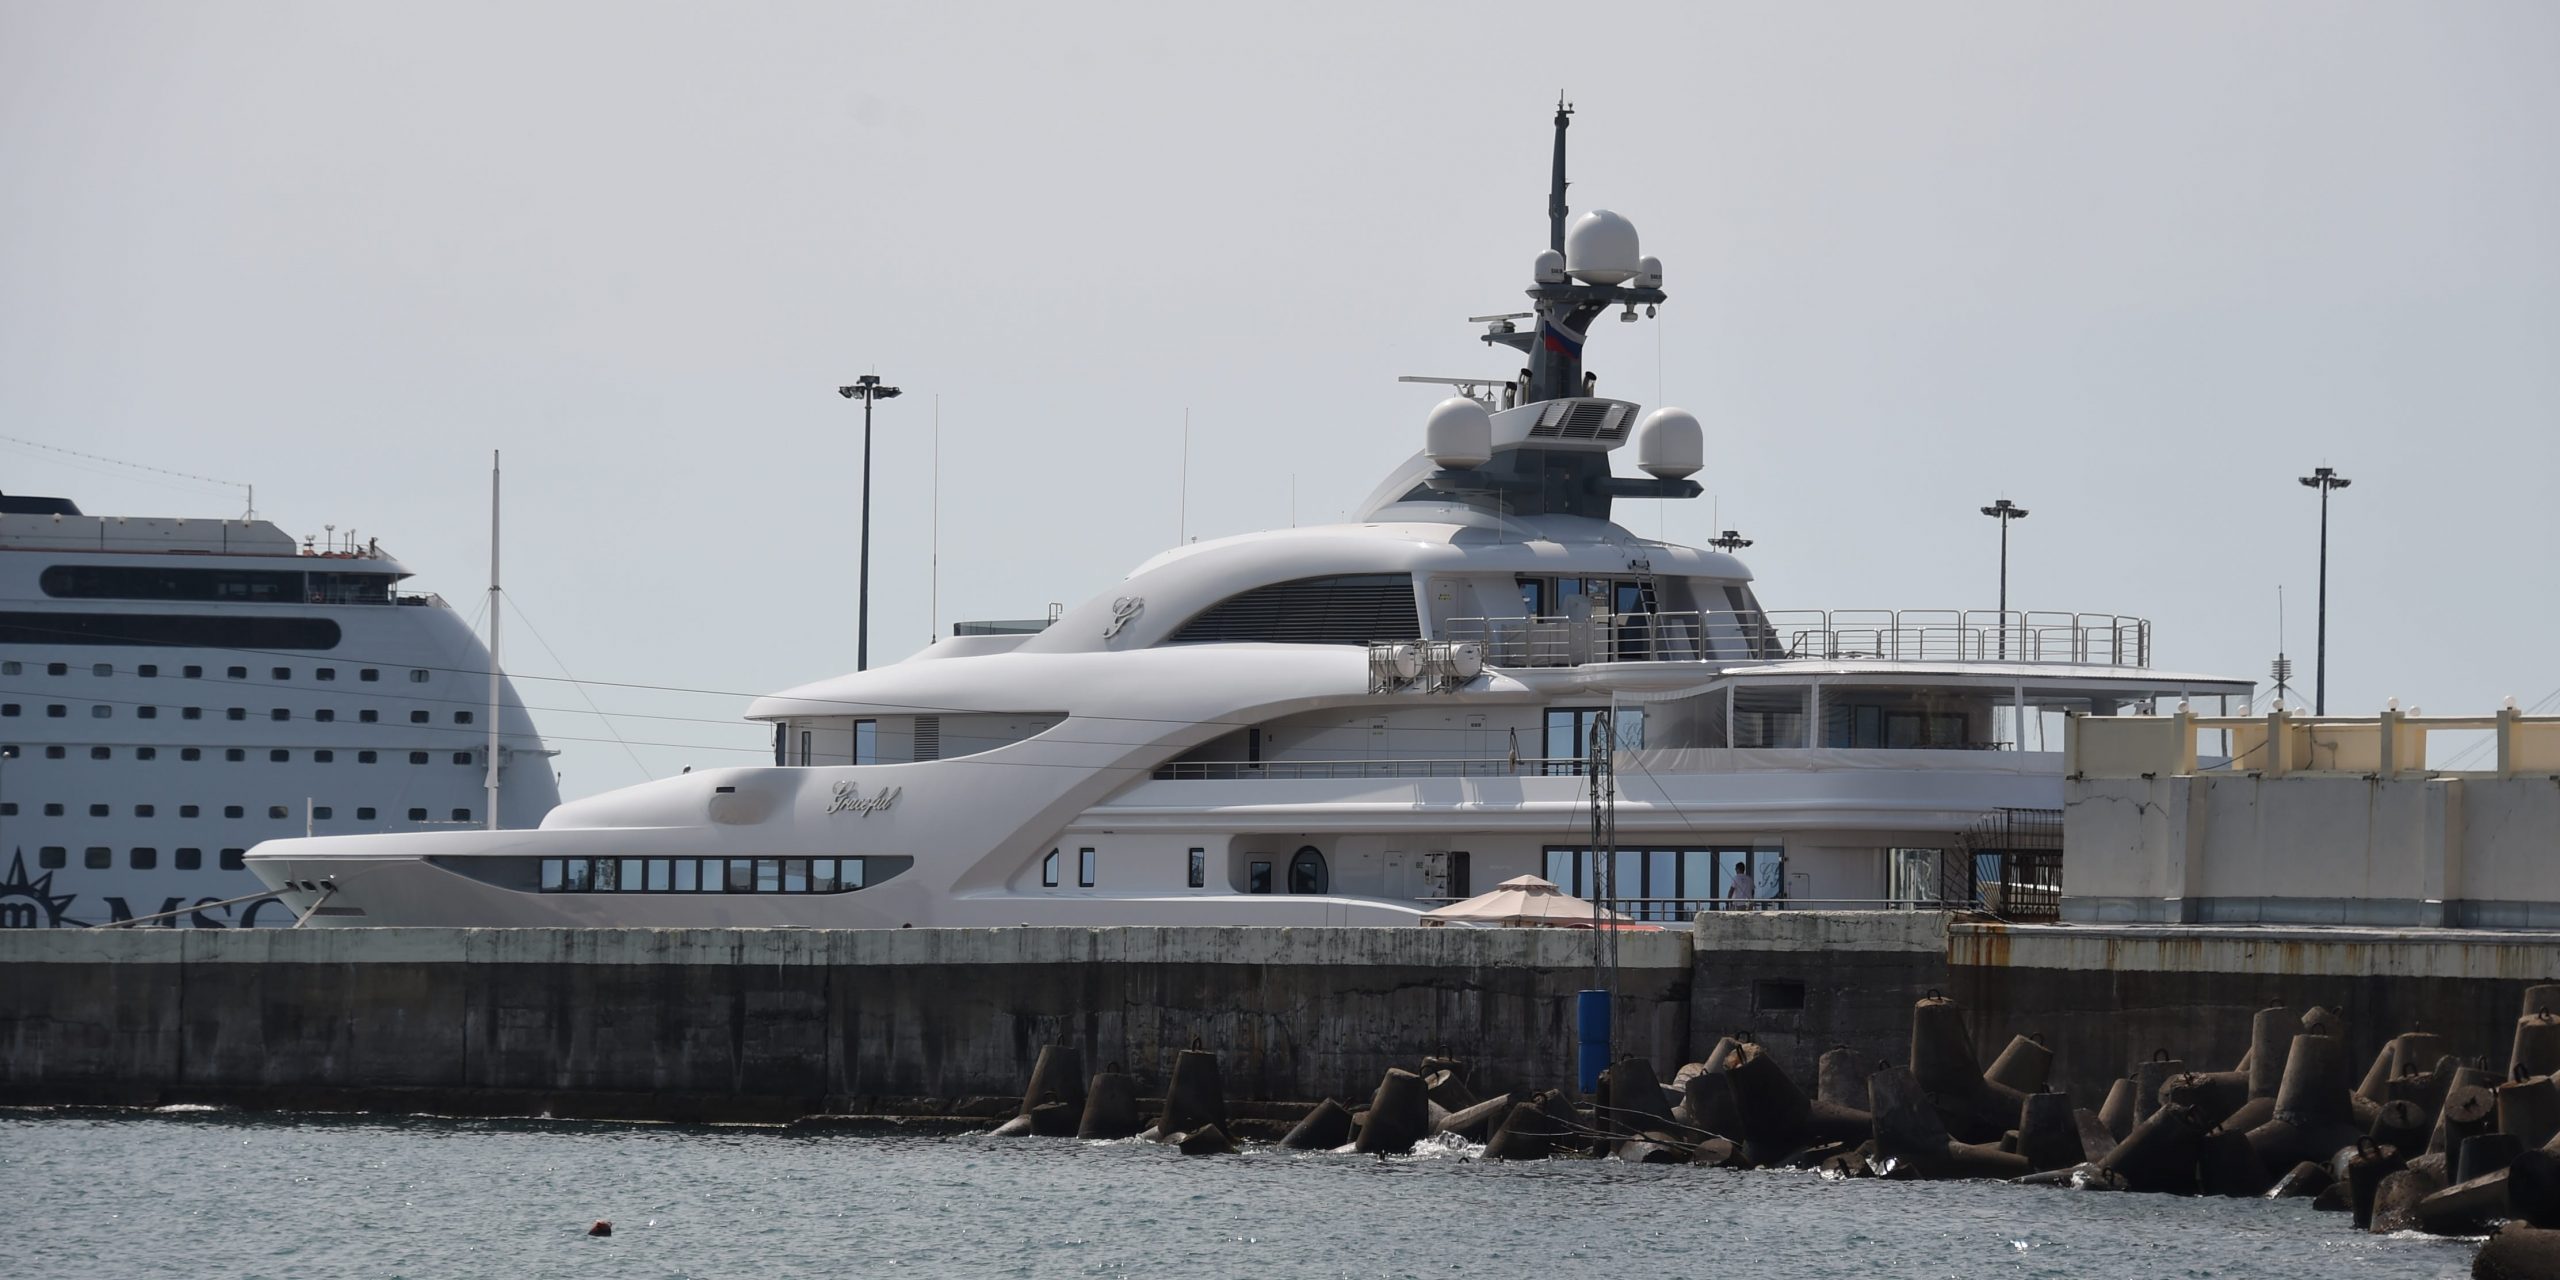 The yacht 'Graceful' of Russian President Vladimir Putin is moored at the port of Sochi, Russia, 13 July 2015.